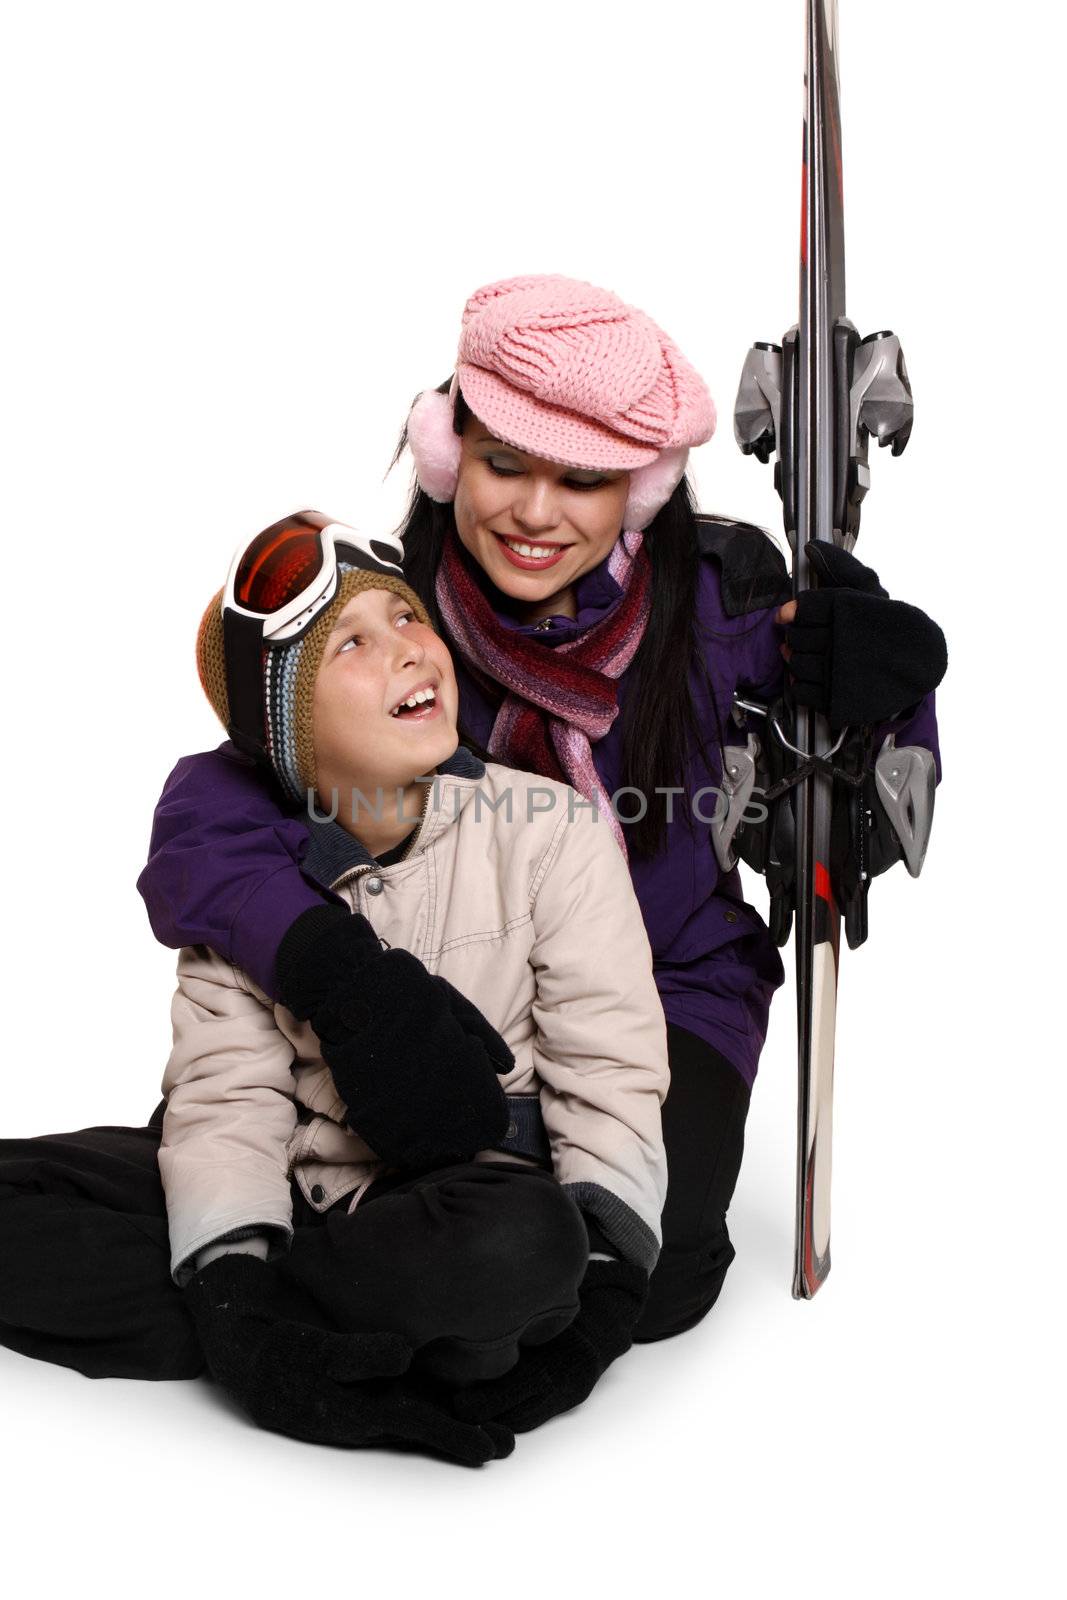 Loving family sitting together with their ski gear